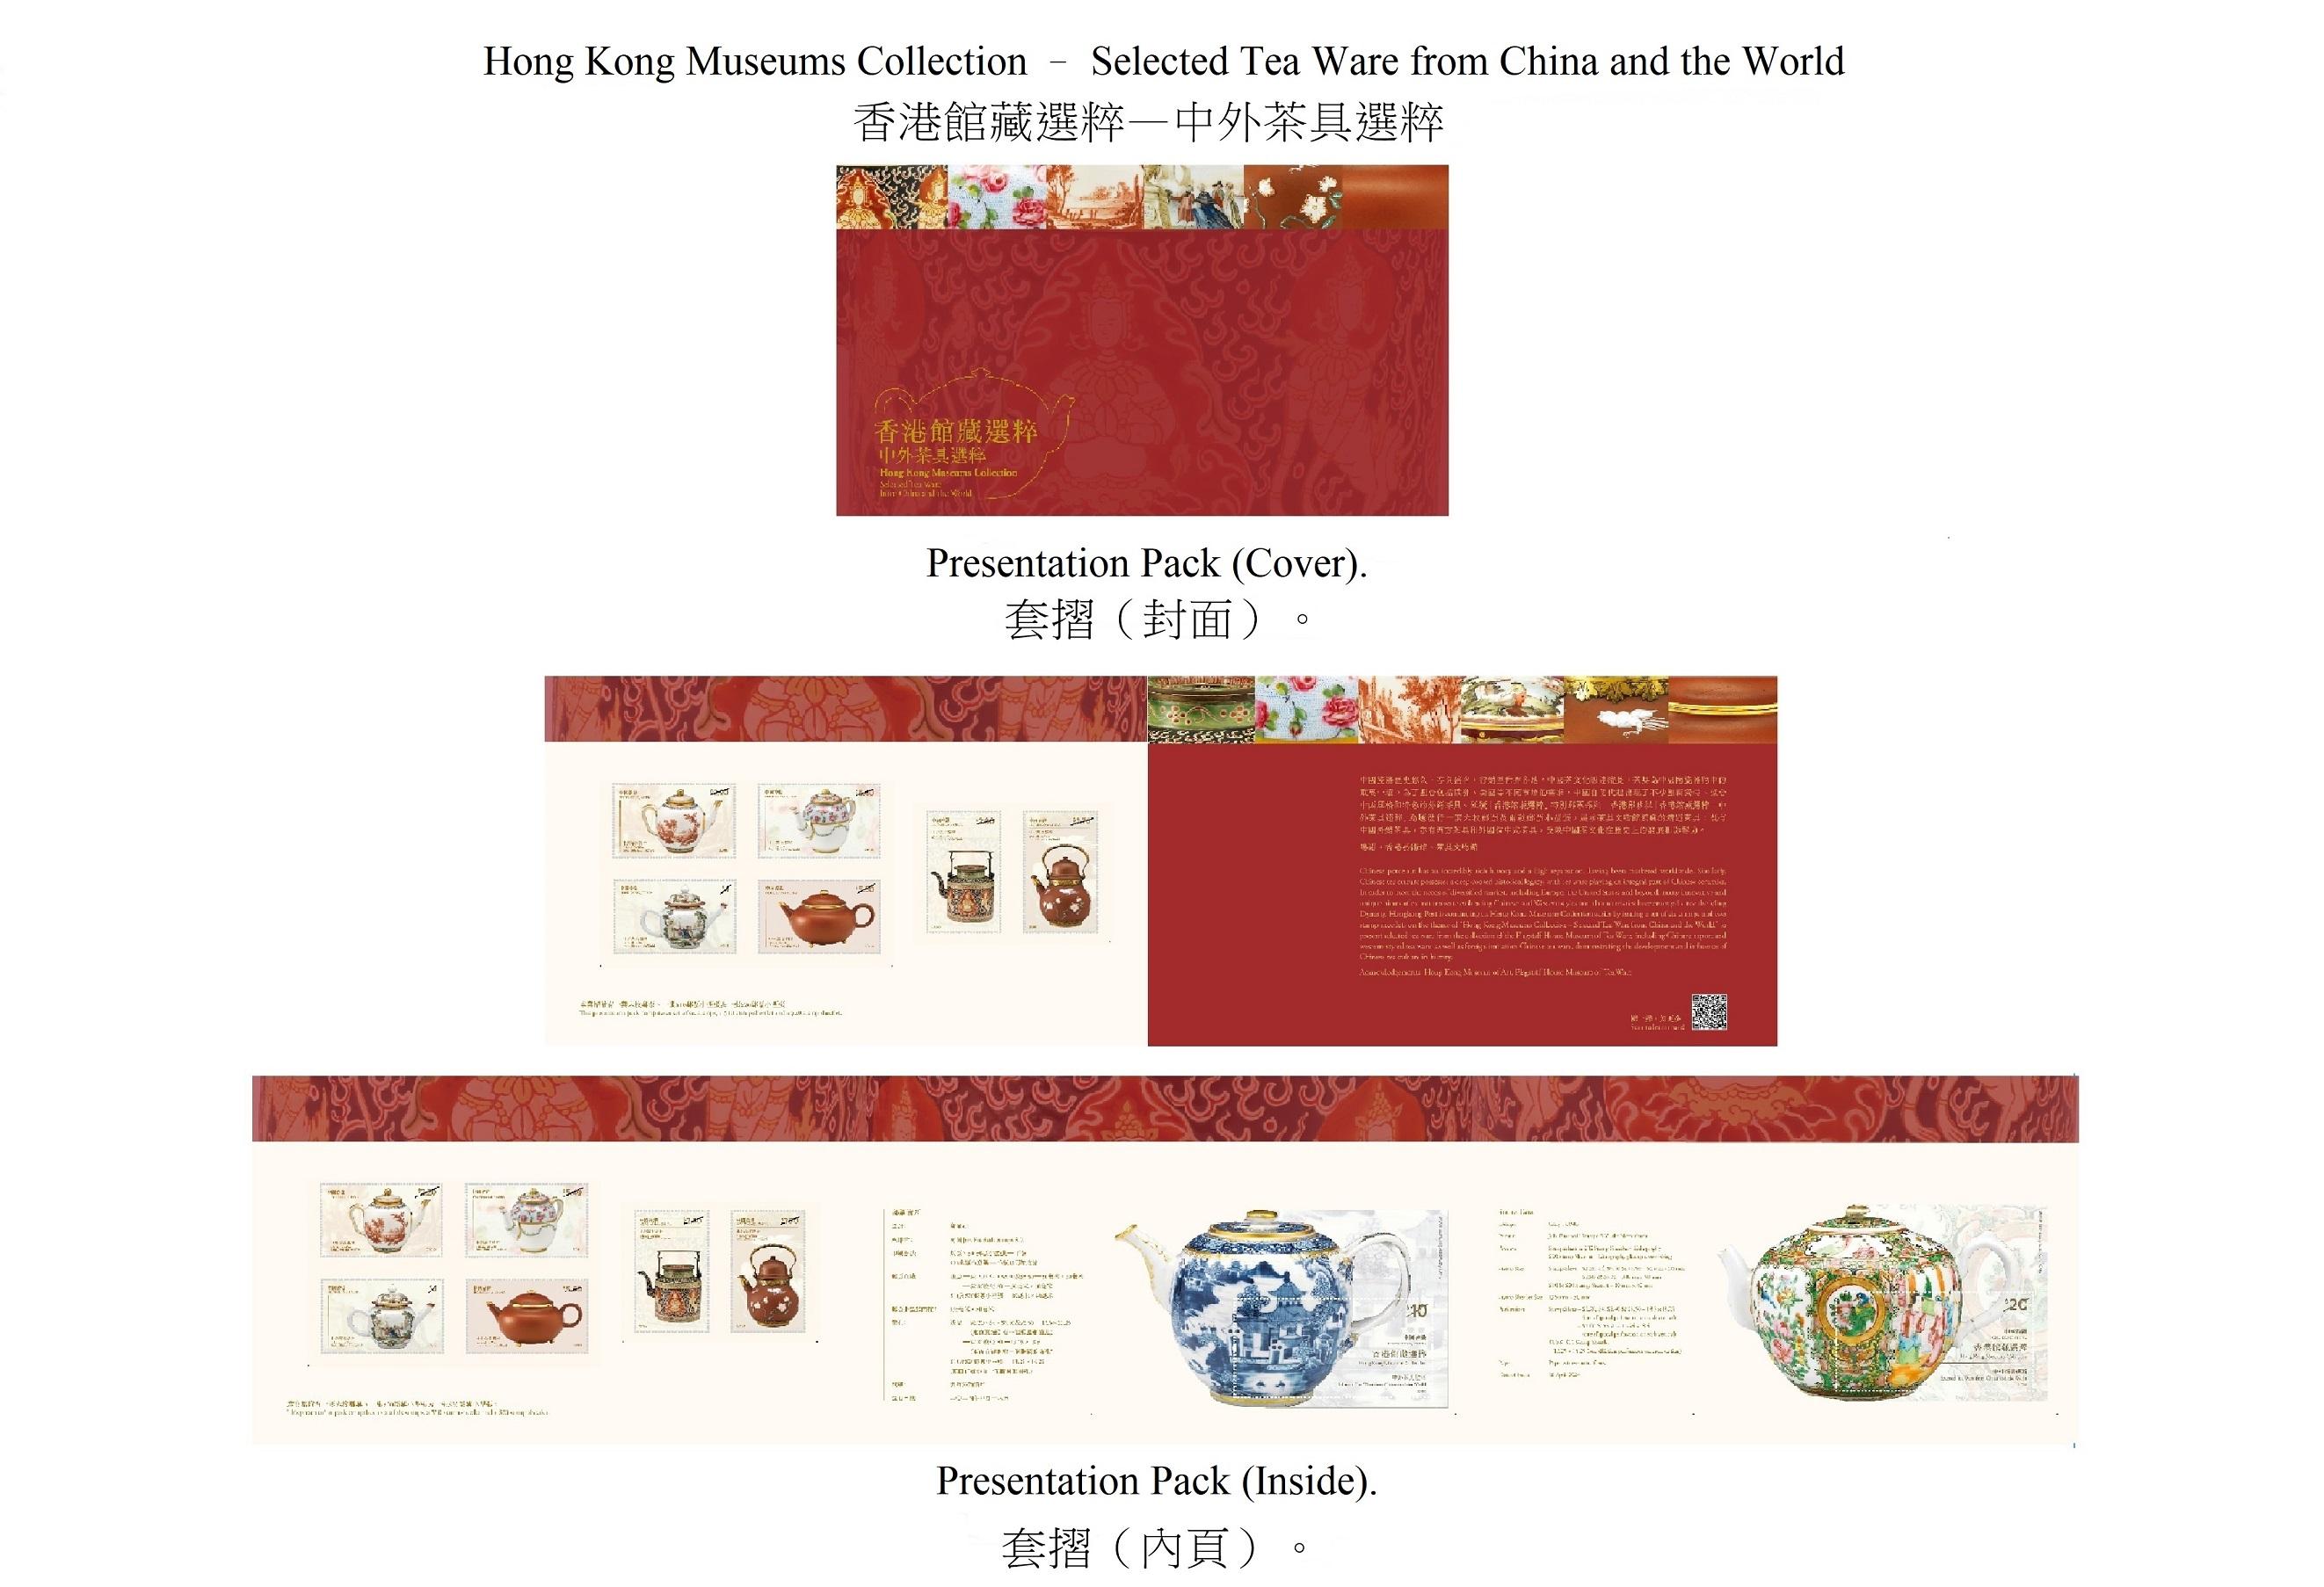 Hongkong Post will launch a special stamp issue and associated philatelic products on the theme of "Hong Kong Museums Collection - Selected Tea Ware from China and the World" on April 18 (Thursday). Photos show the presentation pack.
